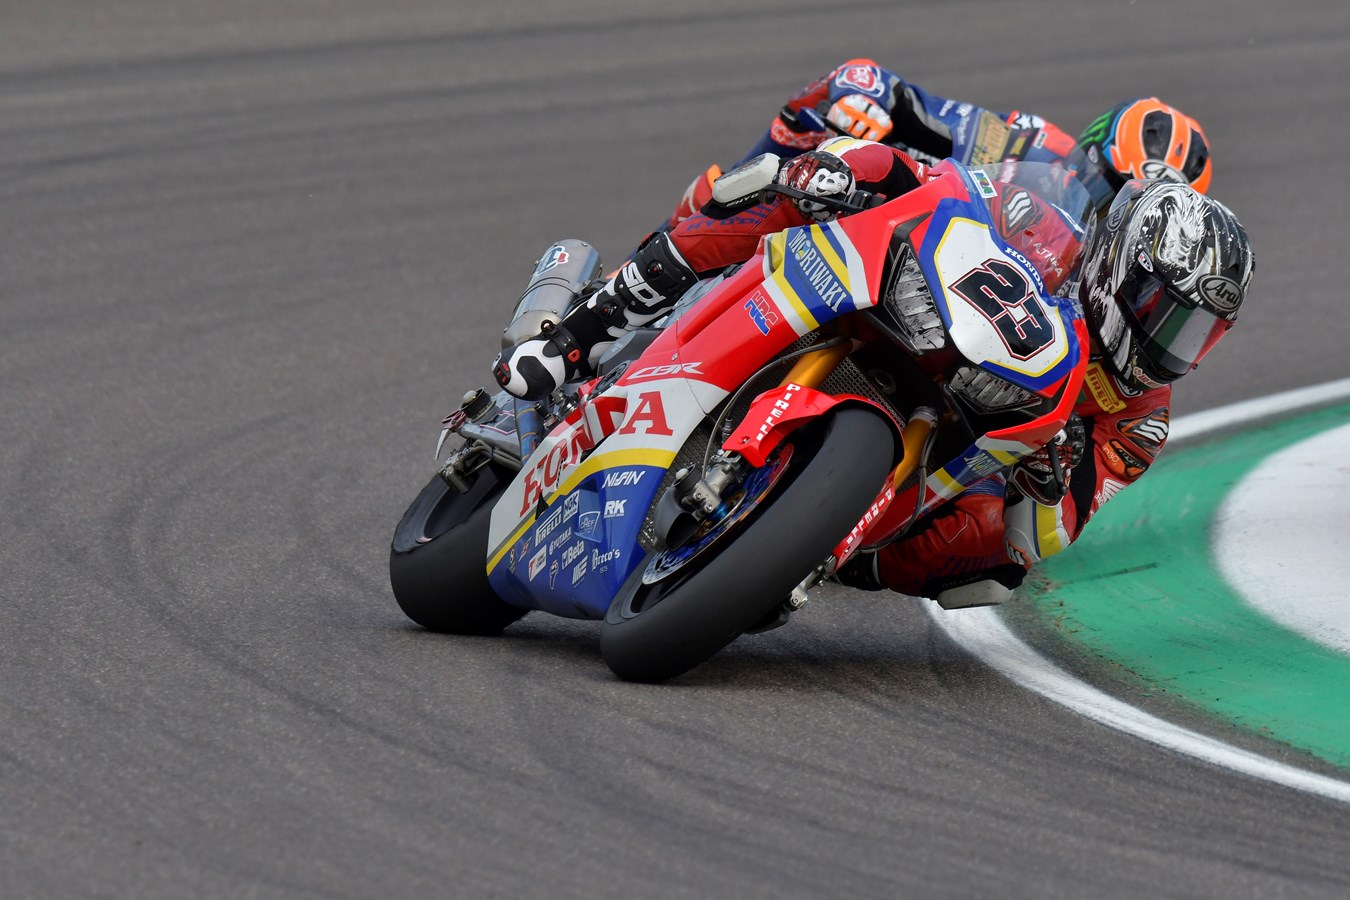 Kiyonari 14th in Race 1, Camier declared unfit to race after qualifying crash